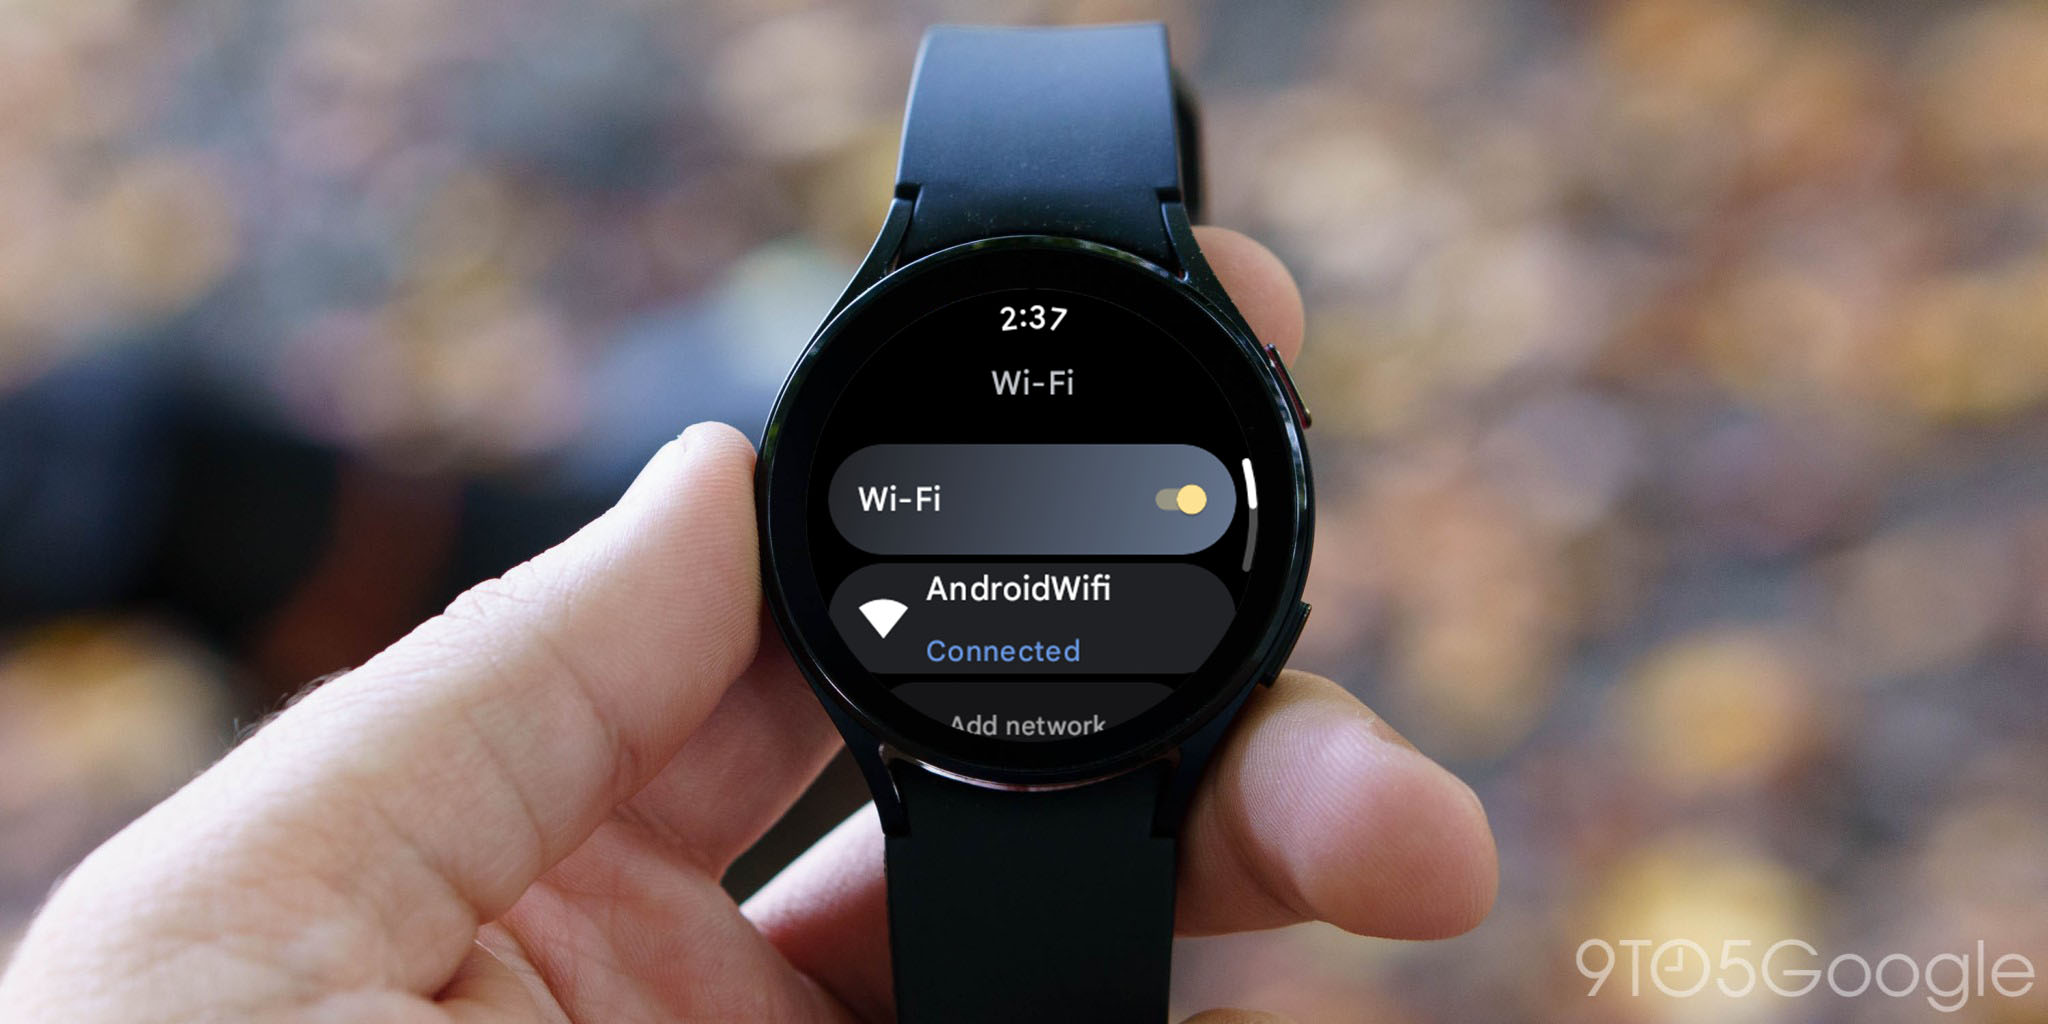 Wear OS 3 gets another preview, shows off the new design - 9to5Google